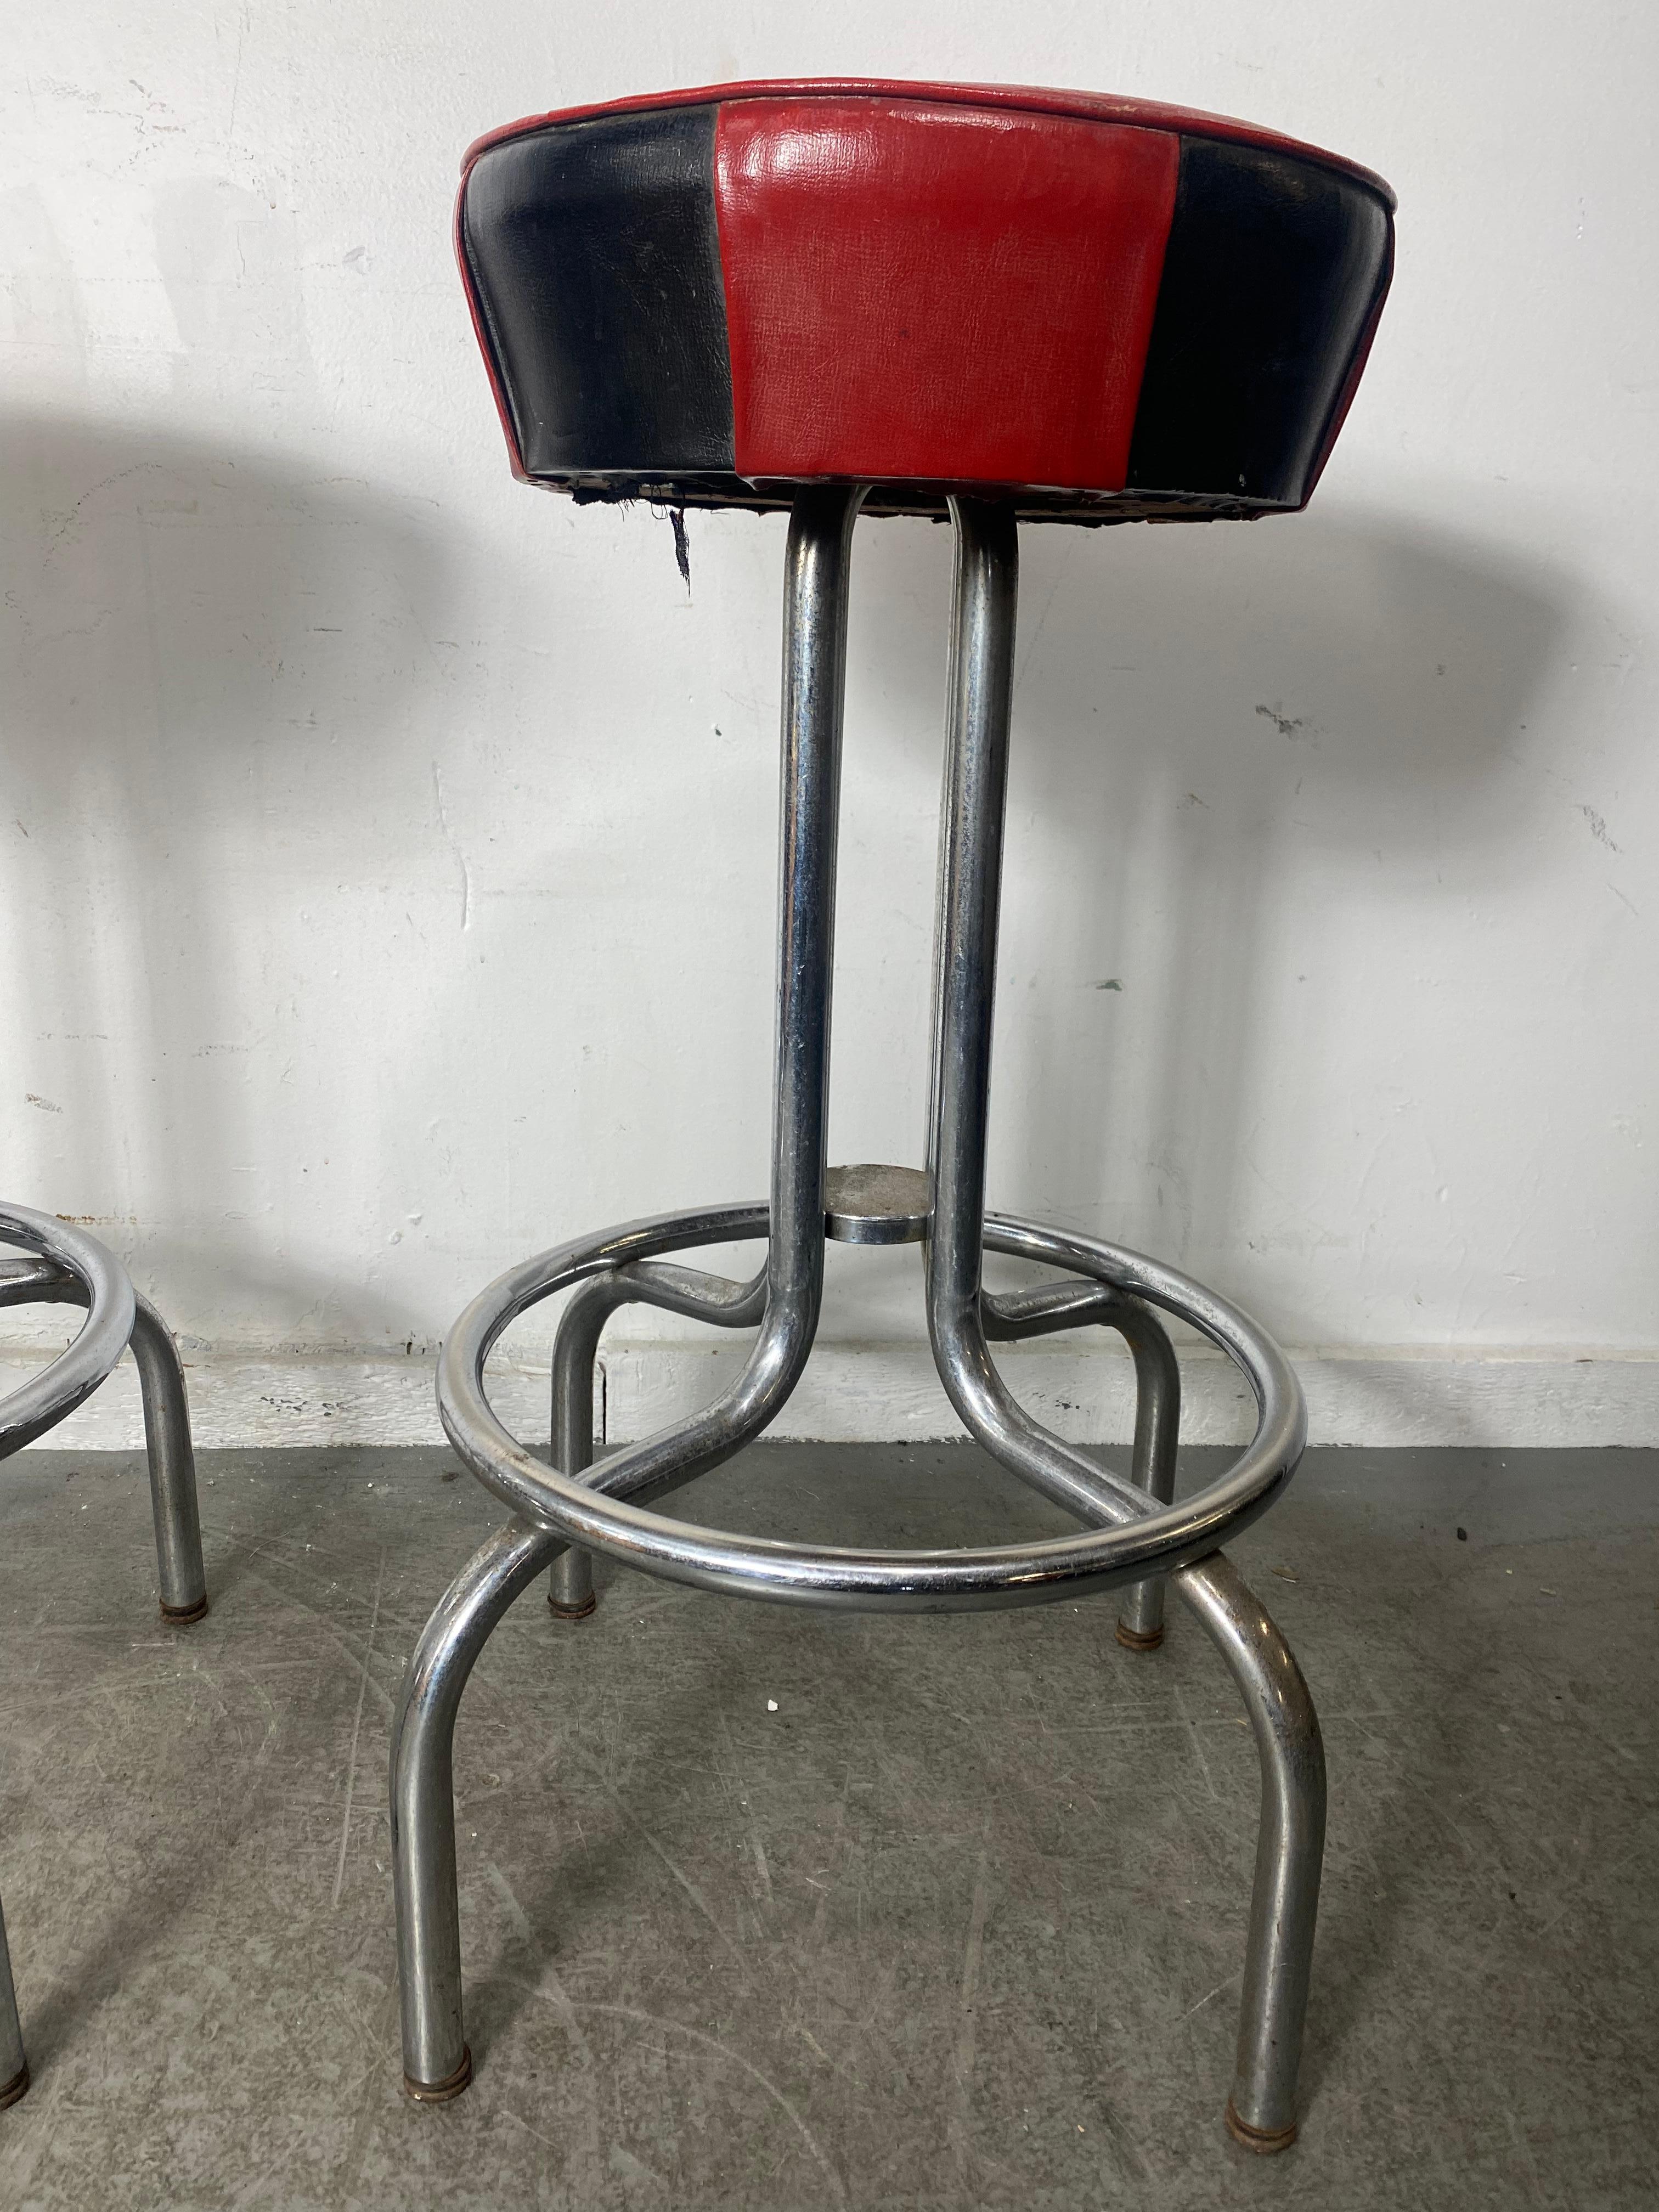 Stunning Pair  Chrome Art Deco Swivel Bar / Counter Stools by Meyer Smith..Super Stylized,, Amazing original Black and Red Naugahyde tops,, Great taper chrome bases with foot rail,, 360% swivel,, 